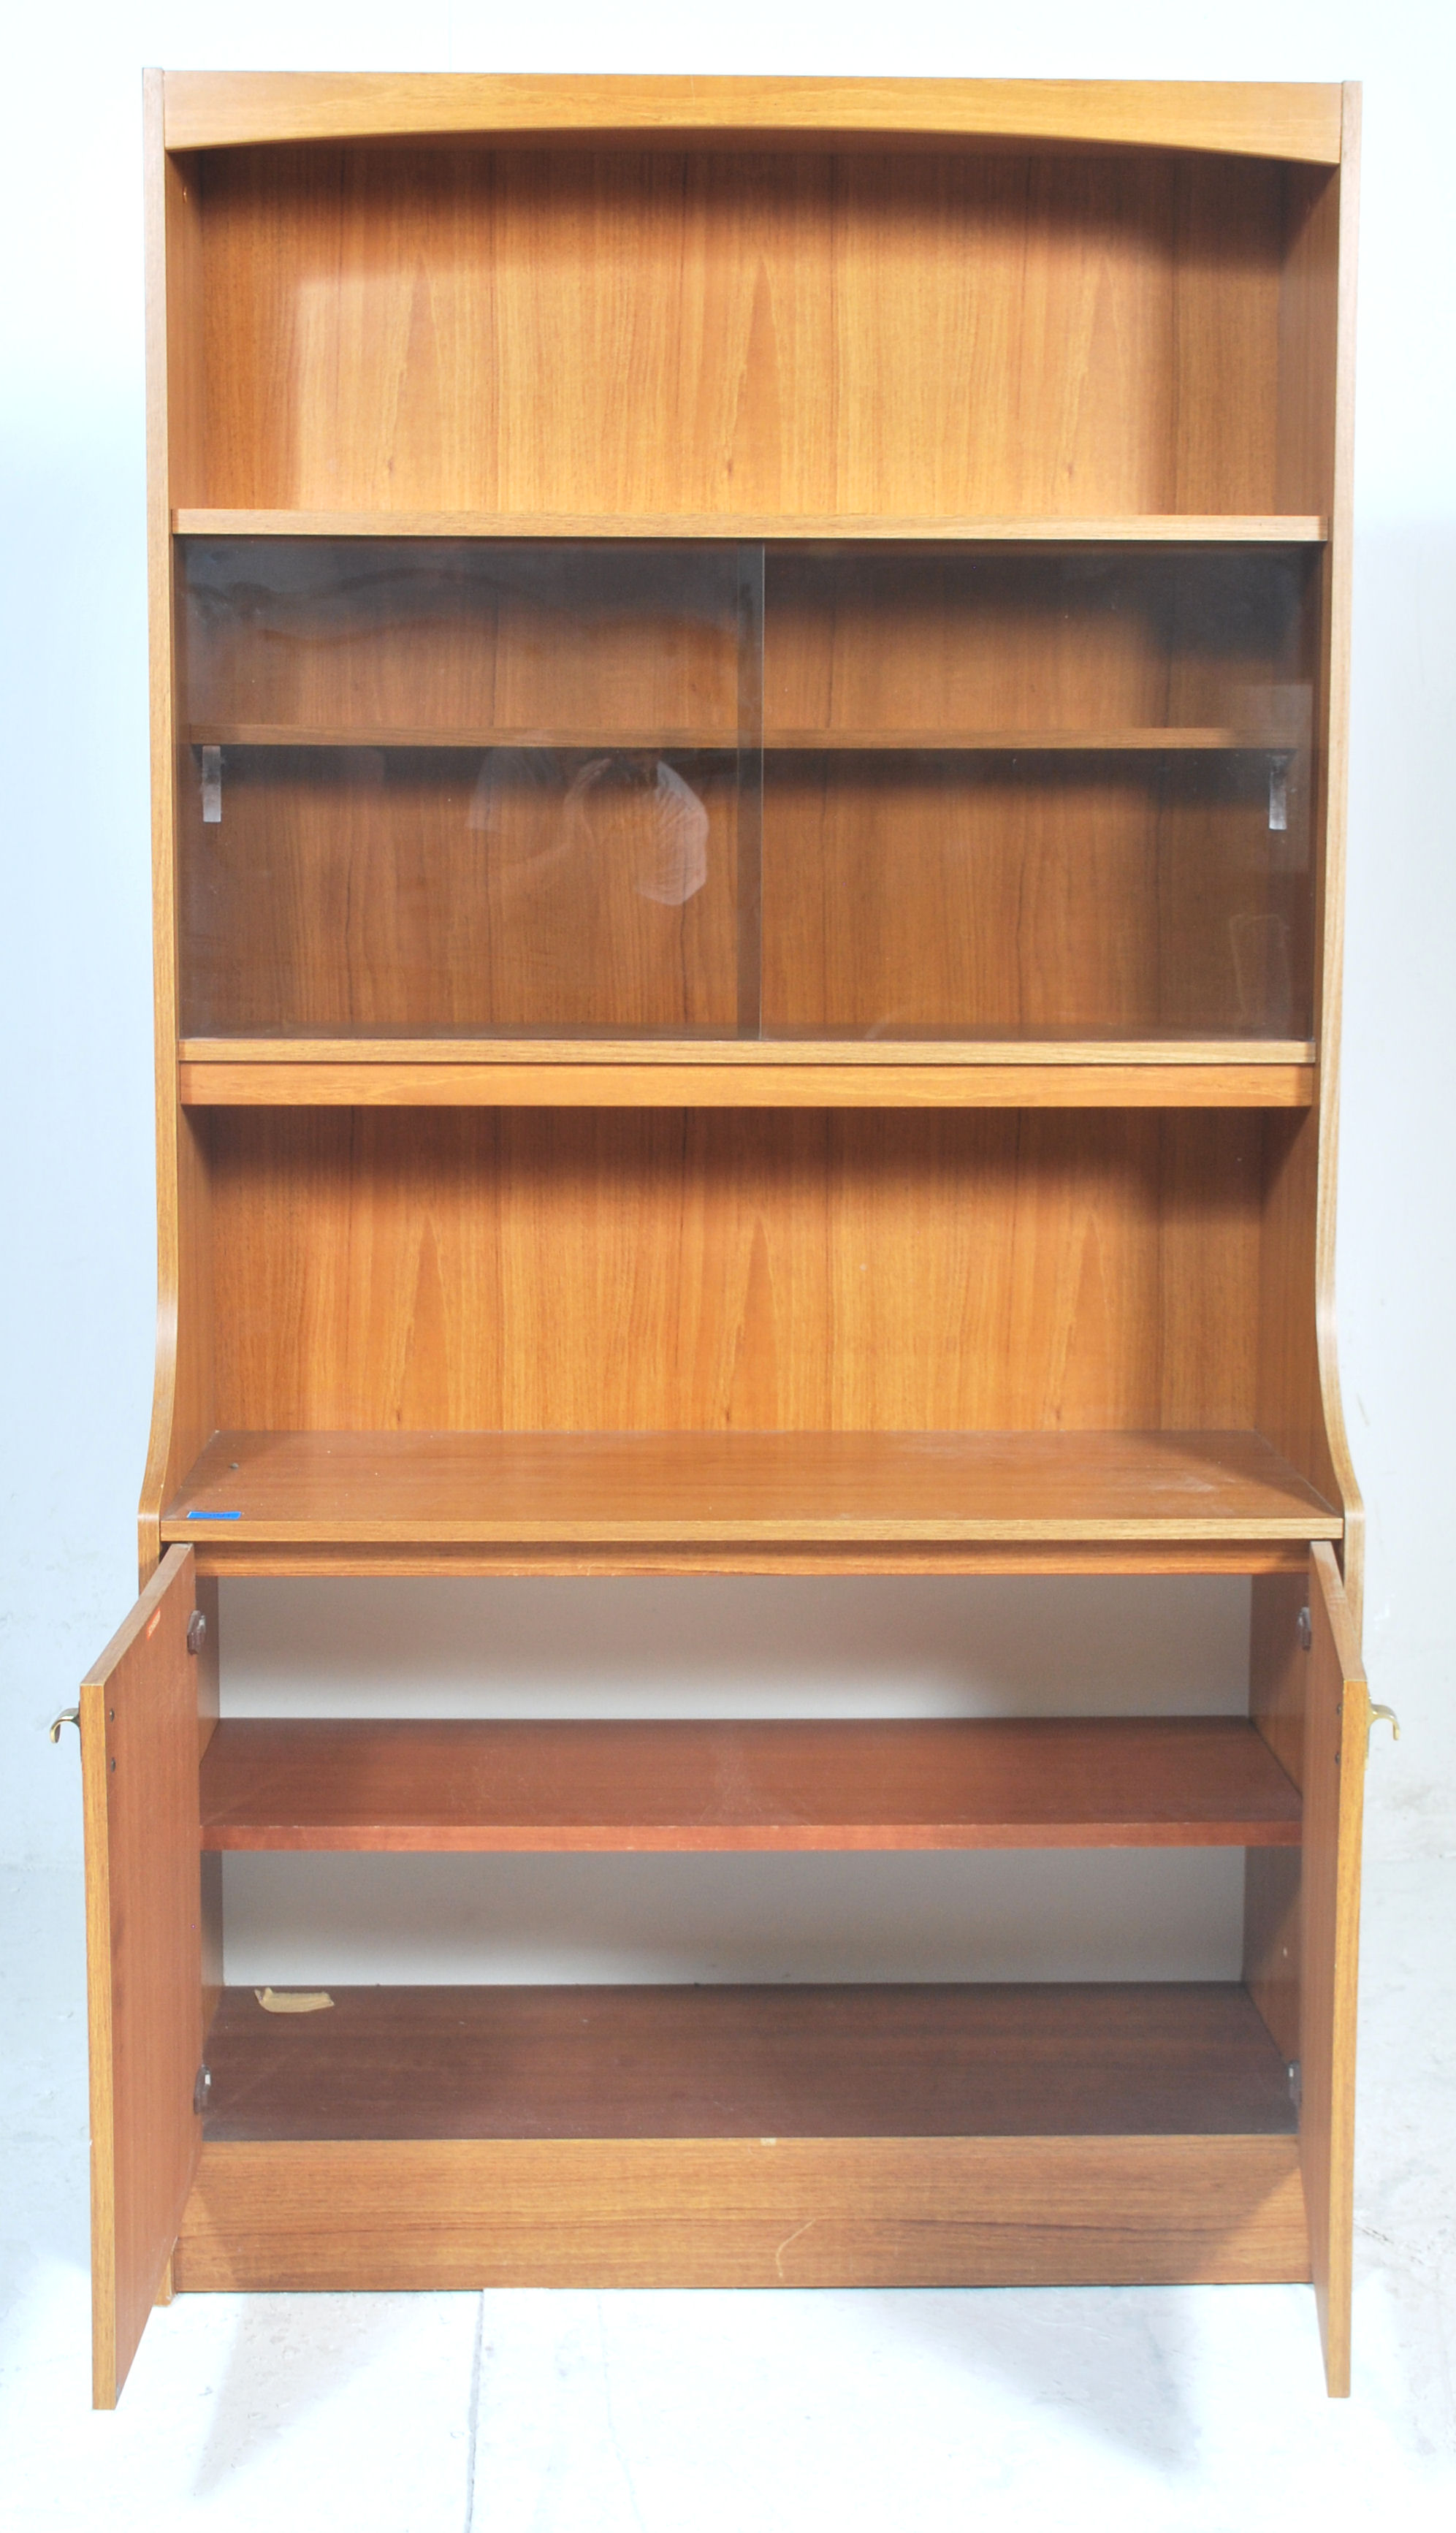 A retro 20th century teak wood veneer  room divider - bookcase cabinet. The upright body with - Image 3 of 5